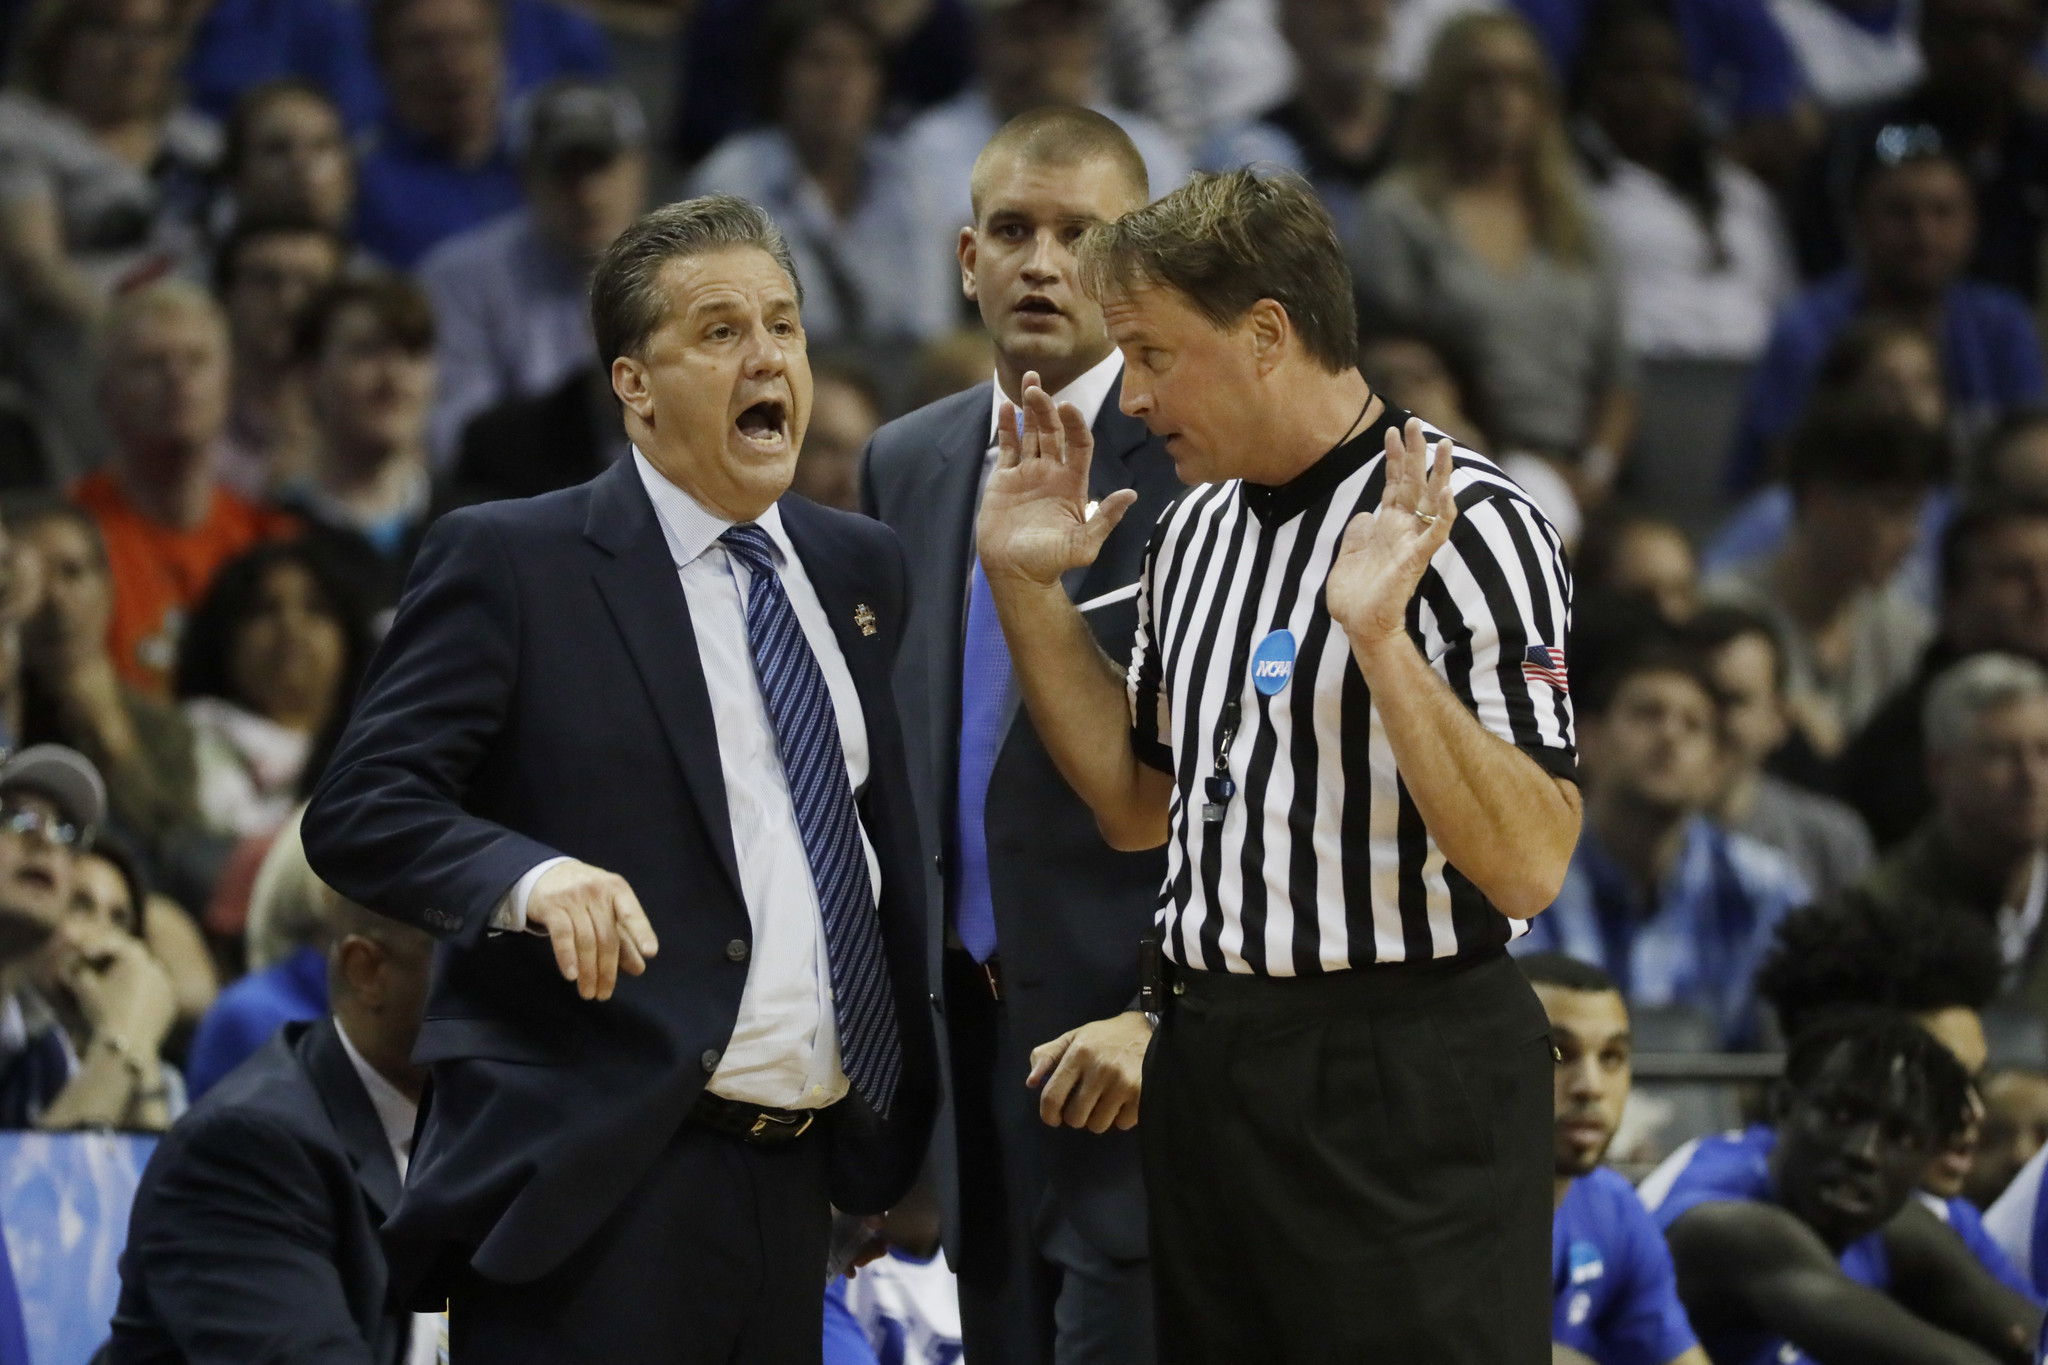 Seven people ID'd for threats to NCAA basketball tourney referee